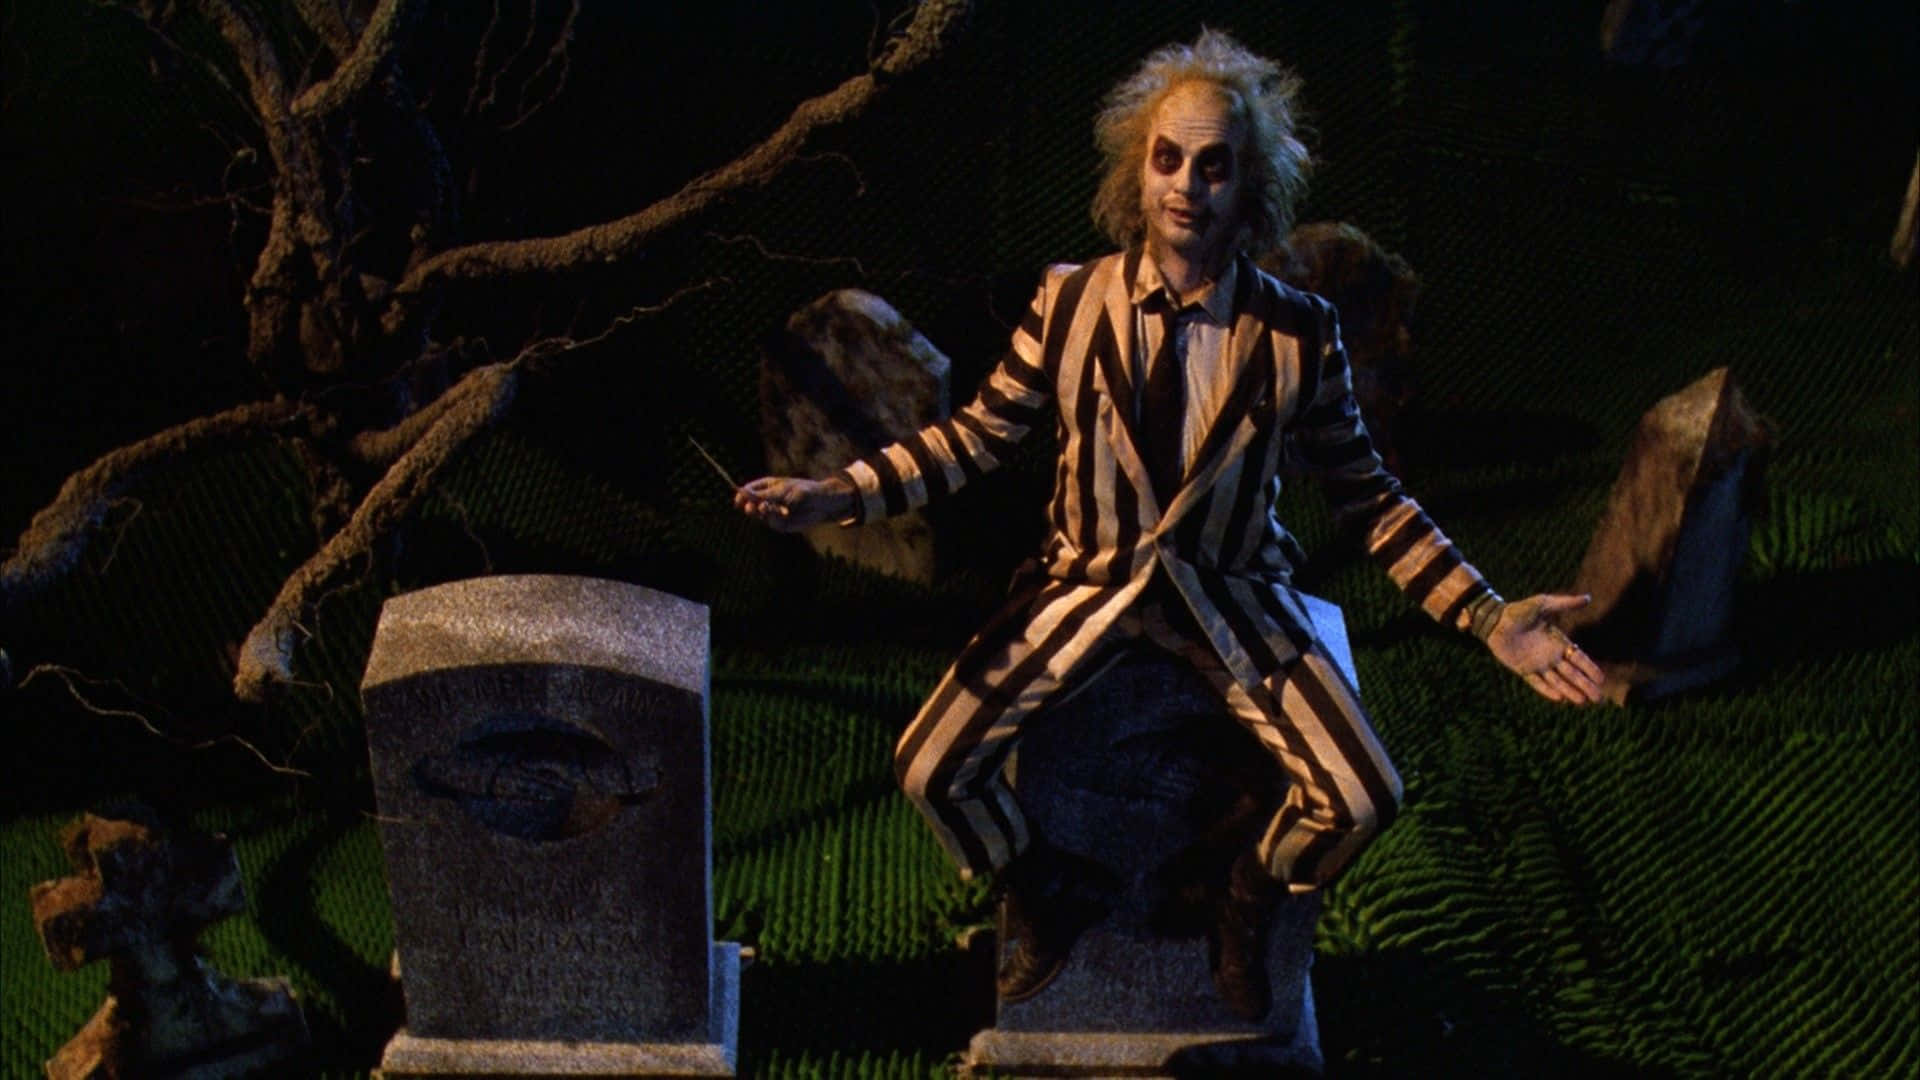 "Laugh at least once a day, it's good for the soul" - Beetlejuice.